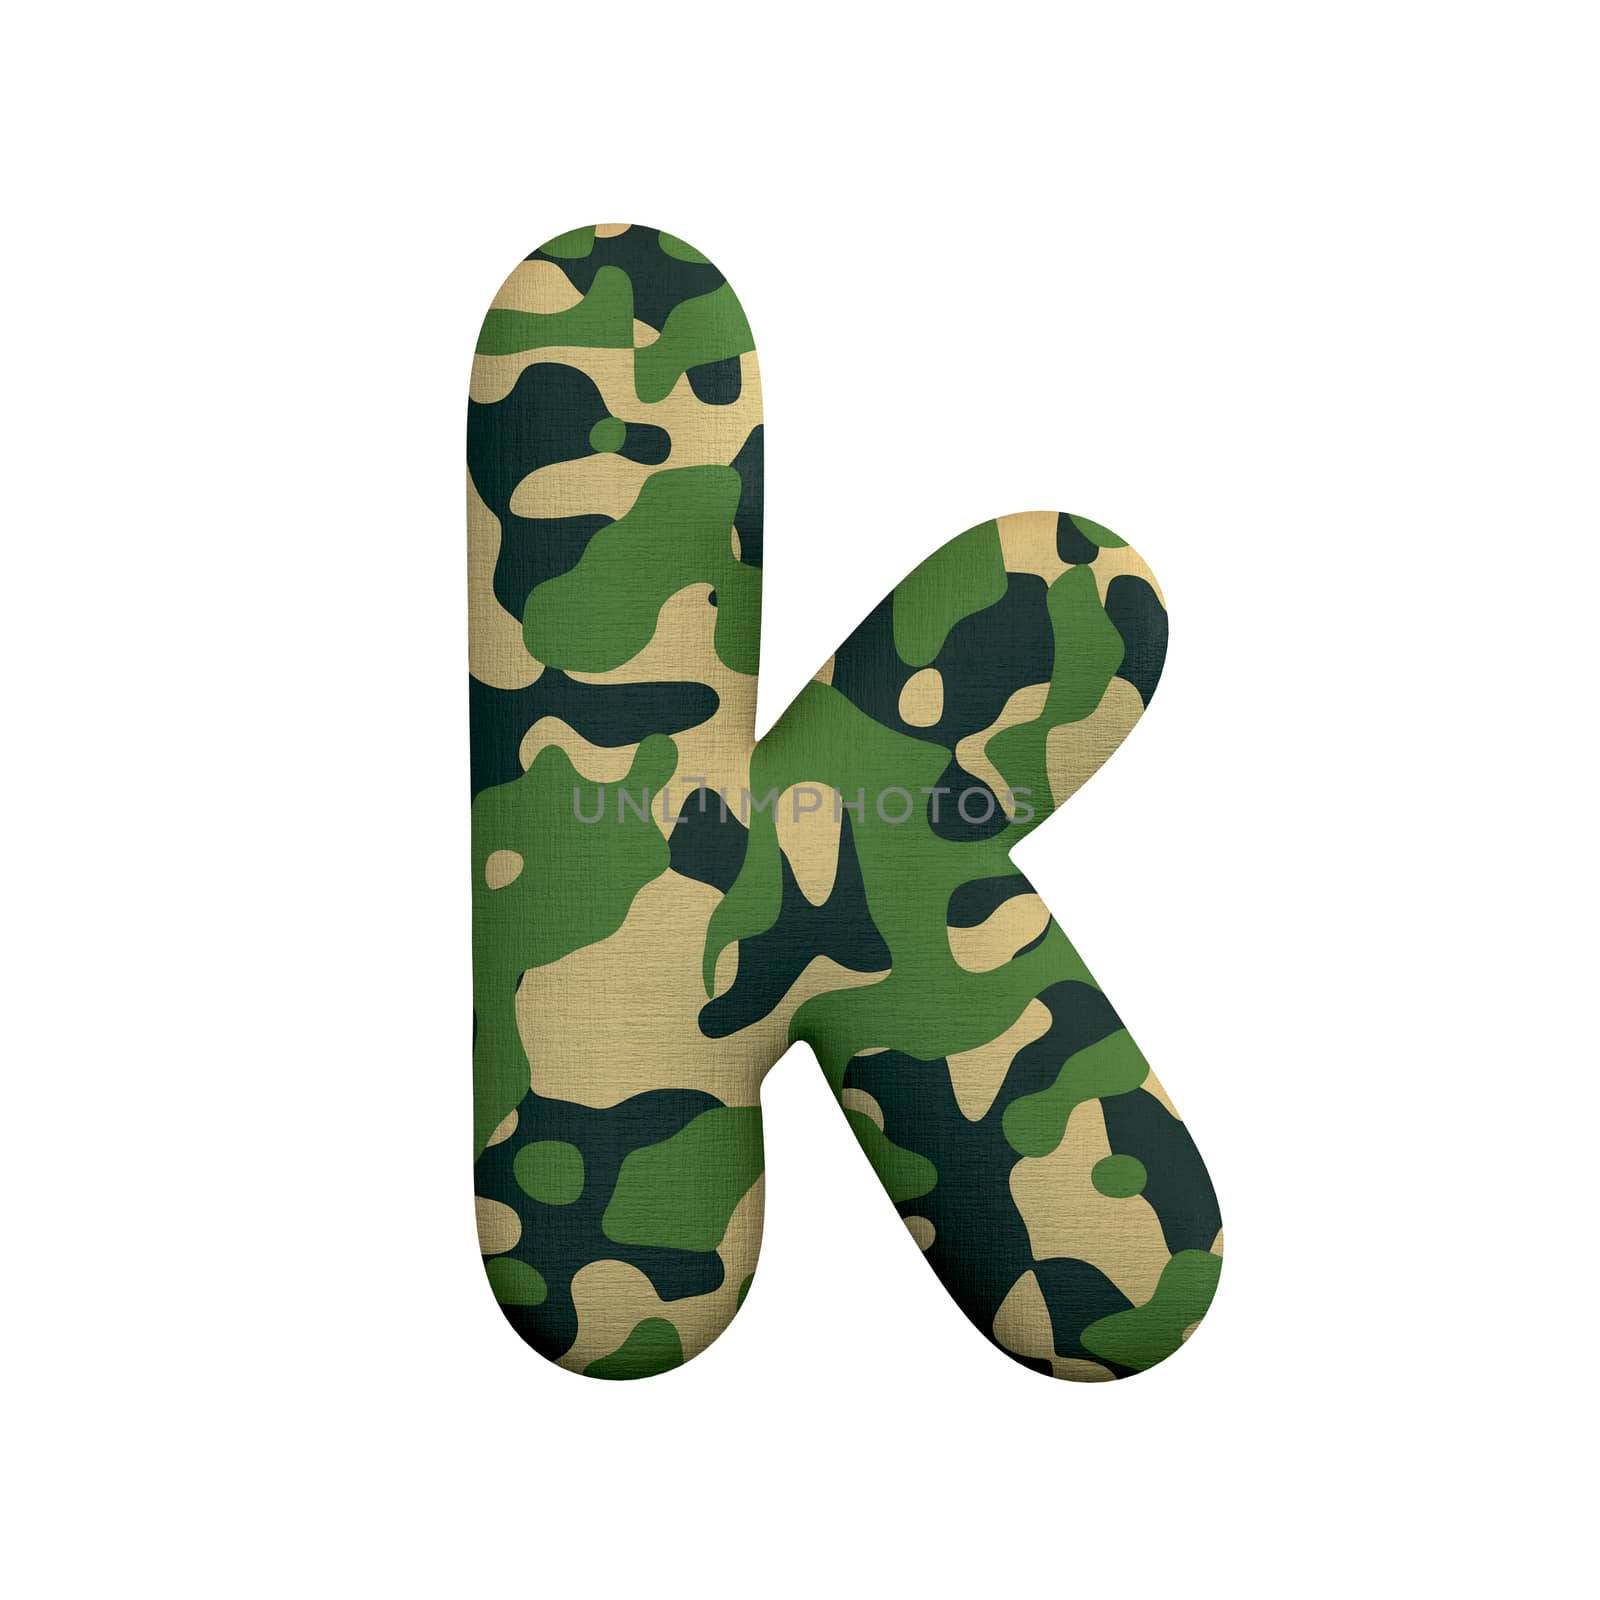 Army letter K - Small 3d Camo font - Army, war or survivalism concept by chrisroll